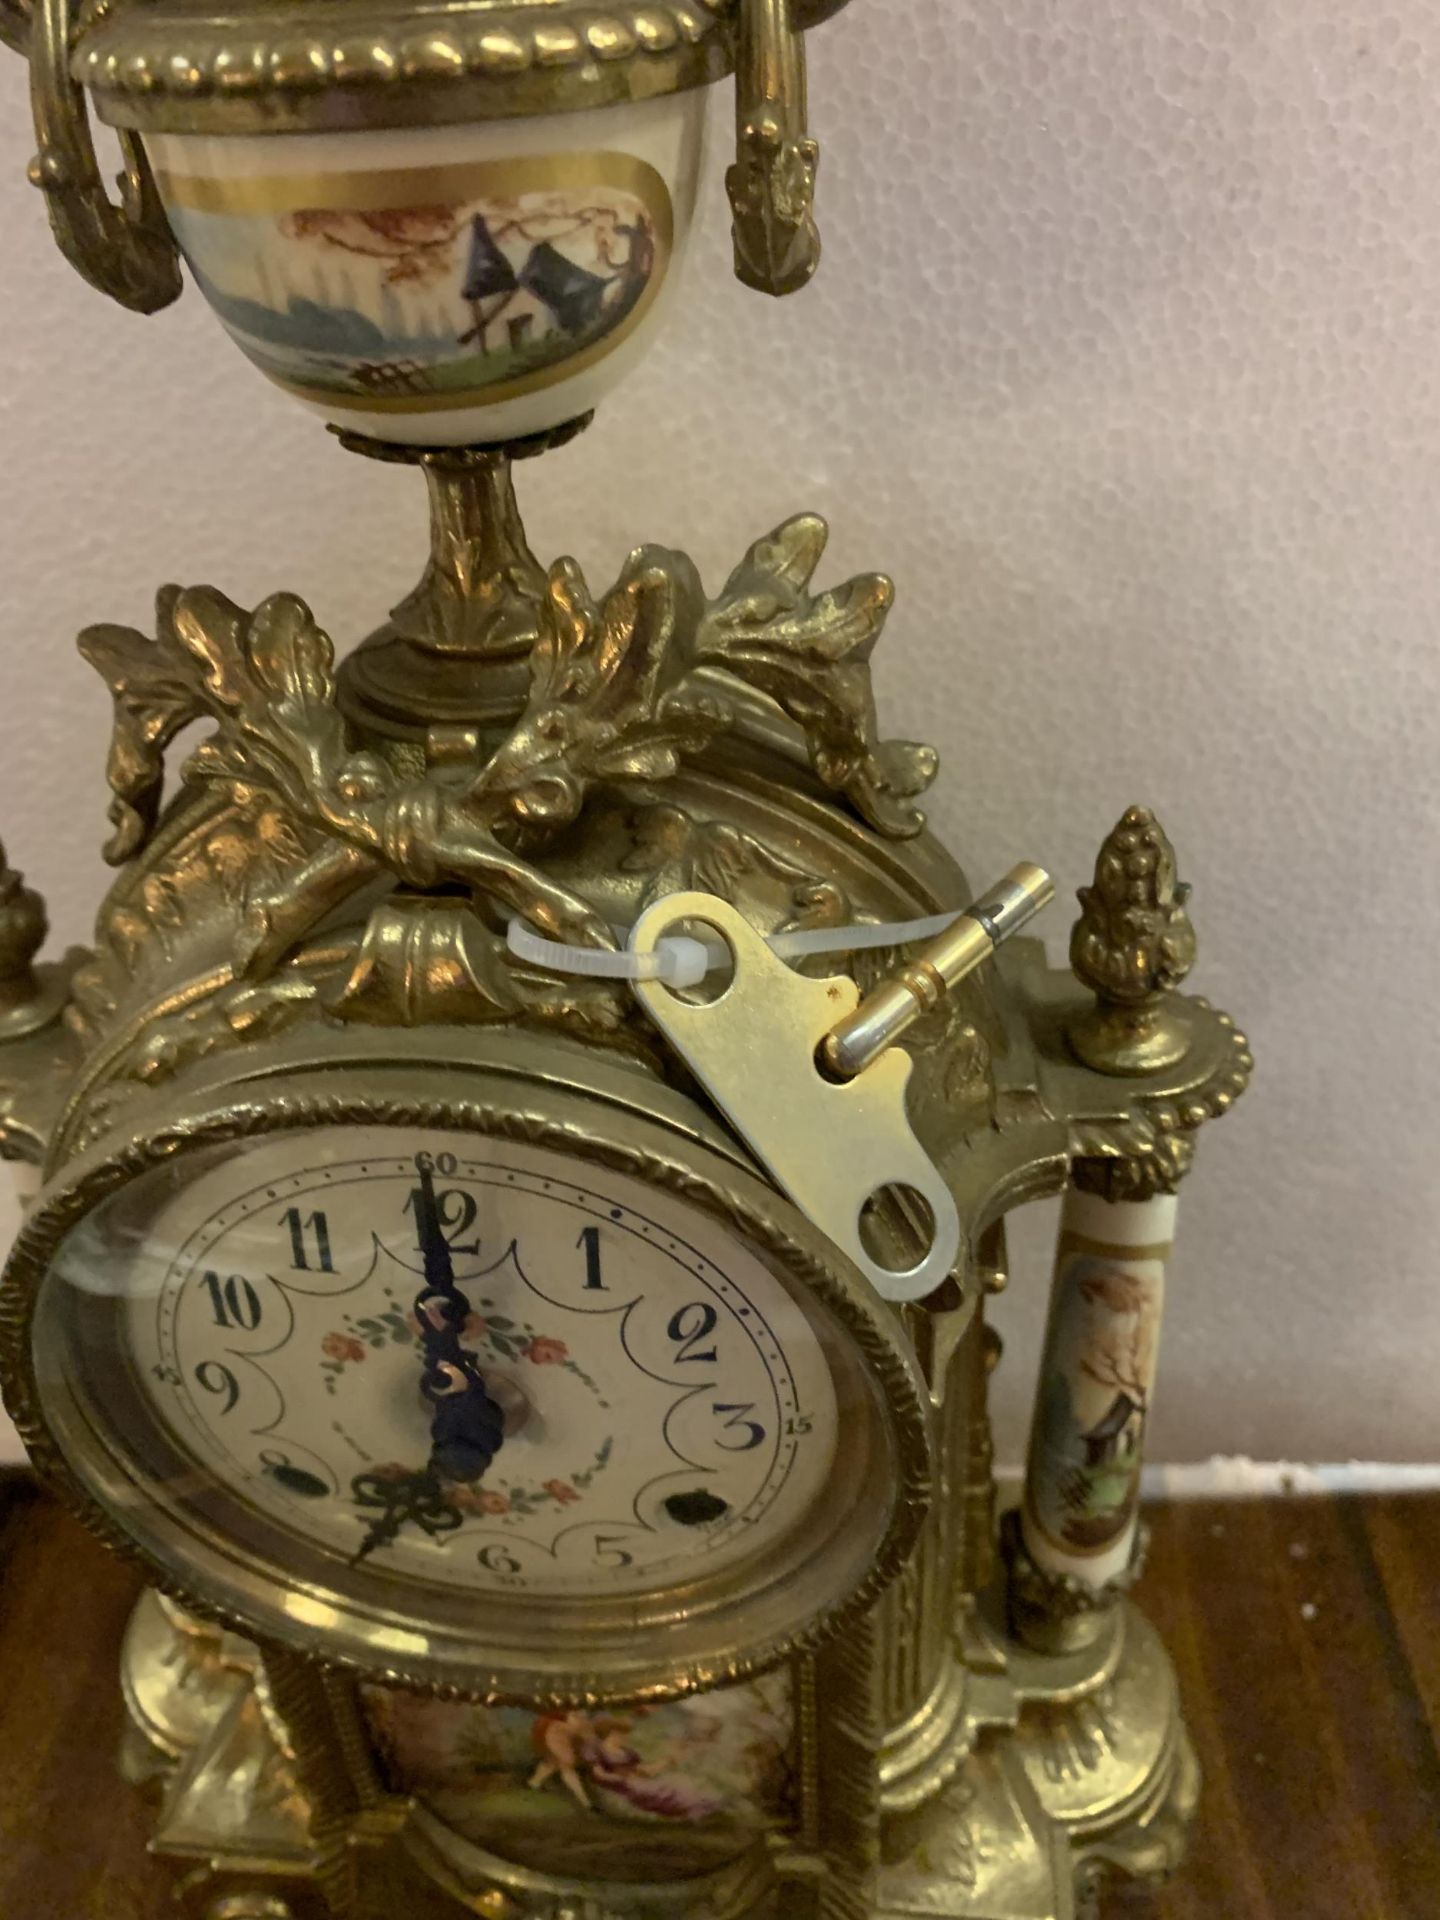 A DECORATIVE MANTLE CLOCK WITH A COURTING COUPLE DESIGN, GARNITURES AND KEY - Image 4 of 5